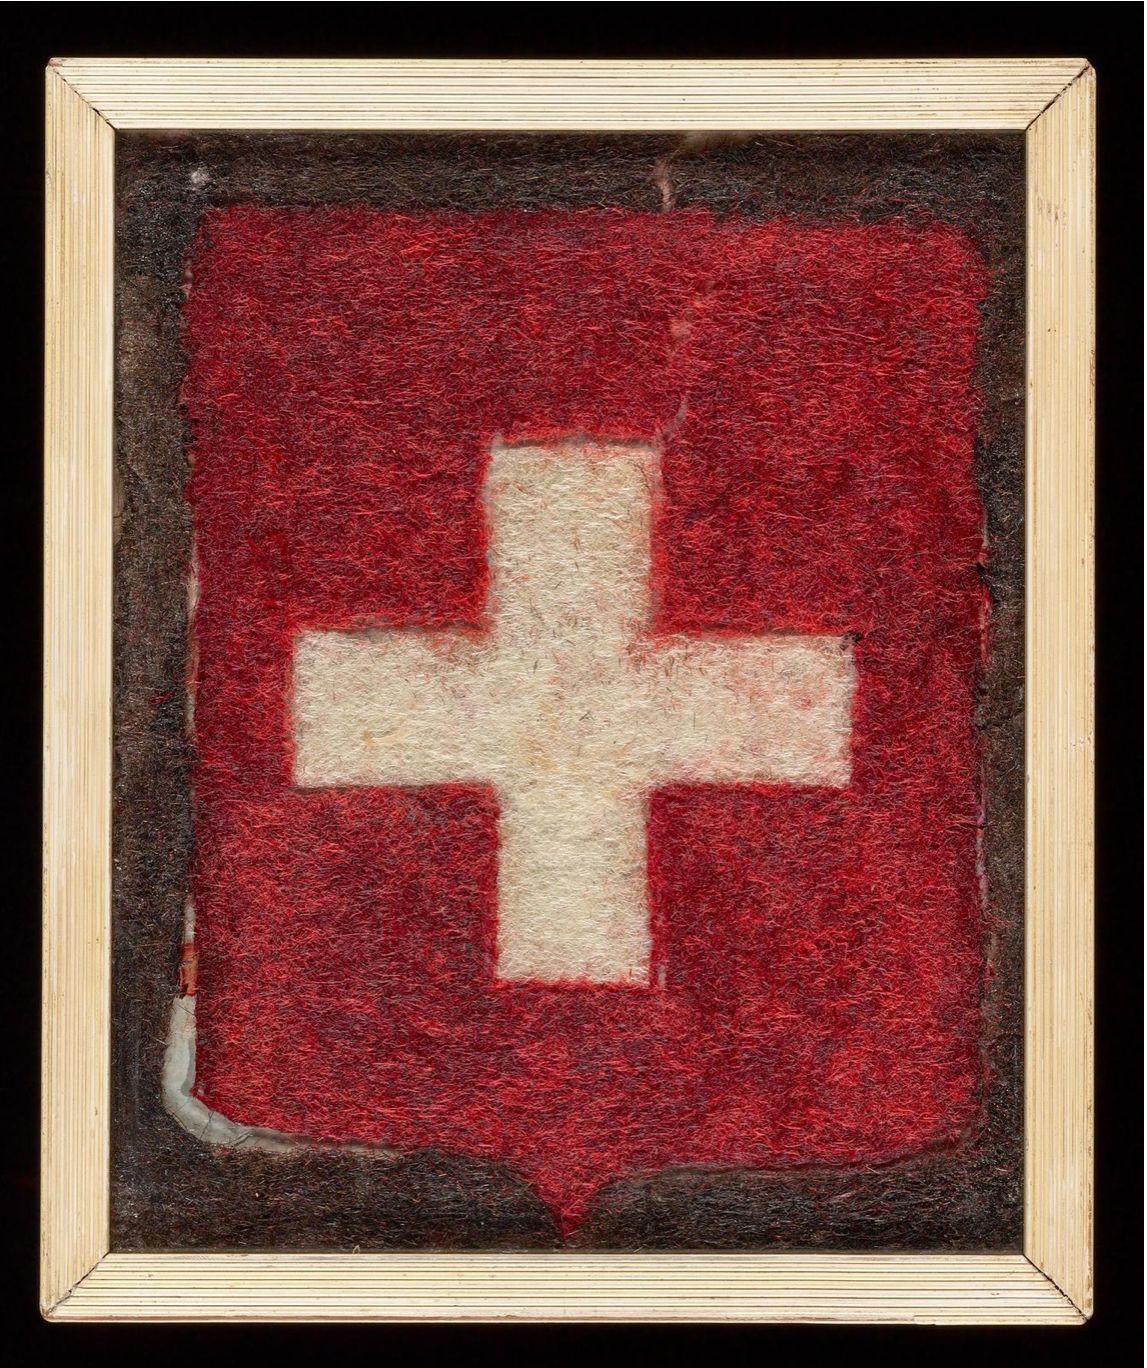 Swiss Cross Logo - We are fans of “care” crosses, this beauty not unlike our Iles logo